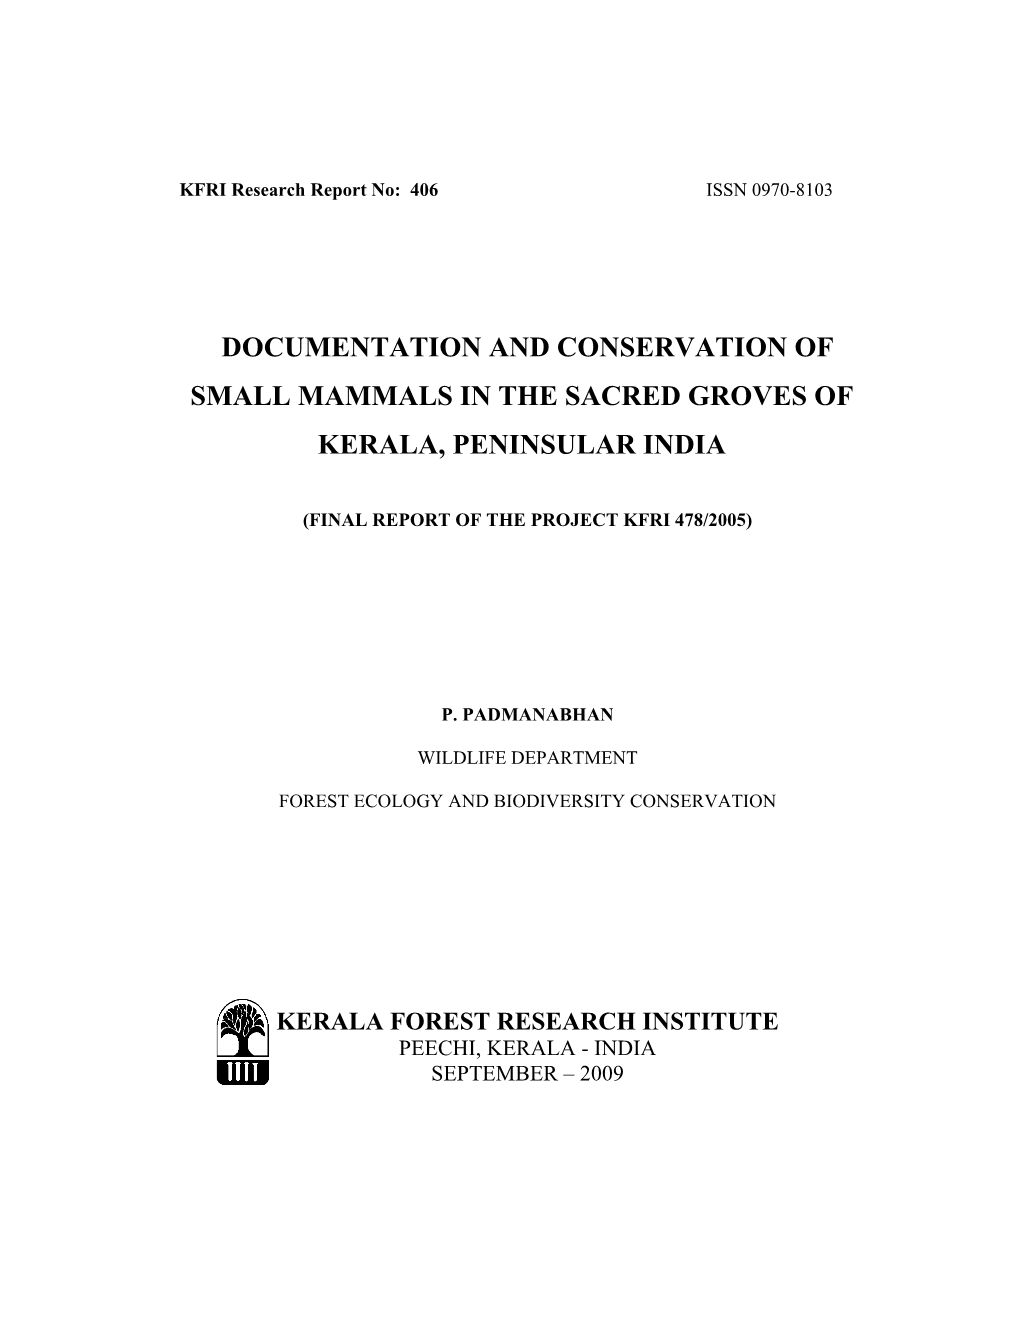 Documentation and Conservation of Small Mammals in the Sacred Groves of Kerala, Peninsular India